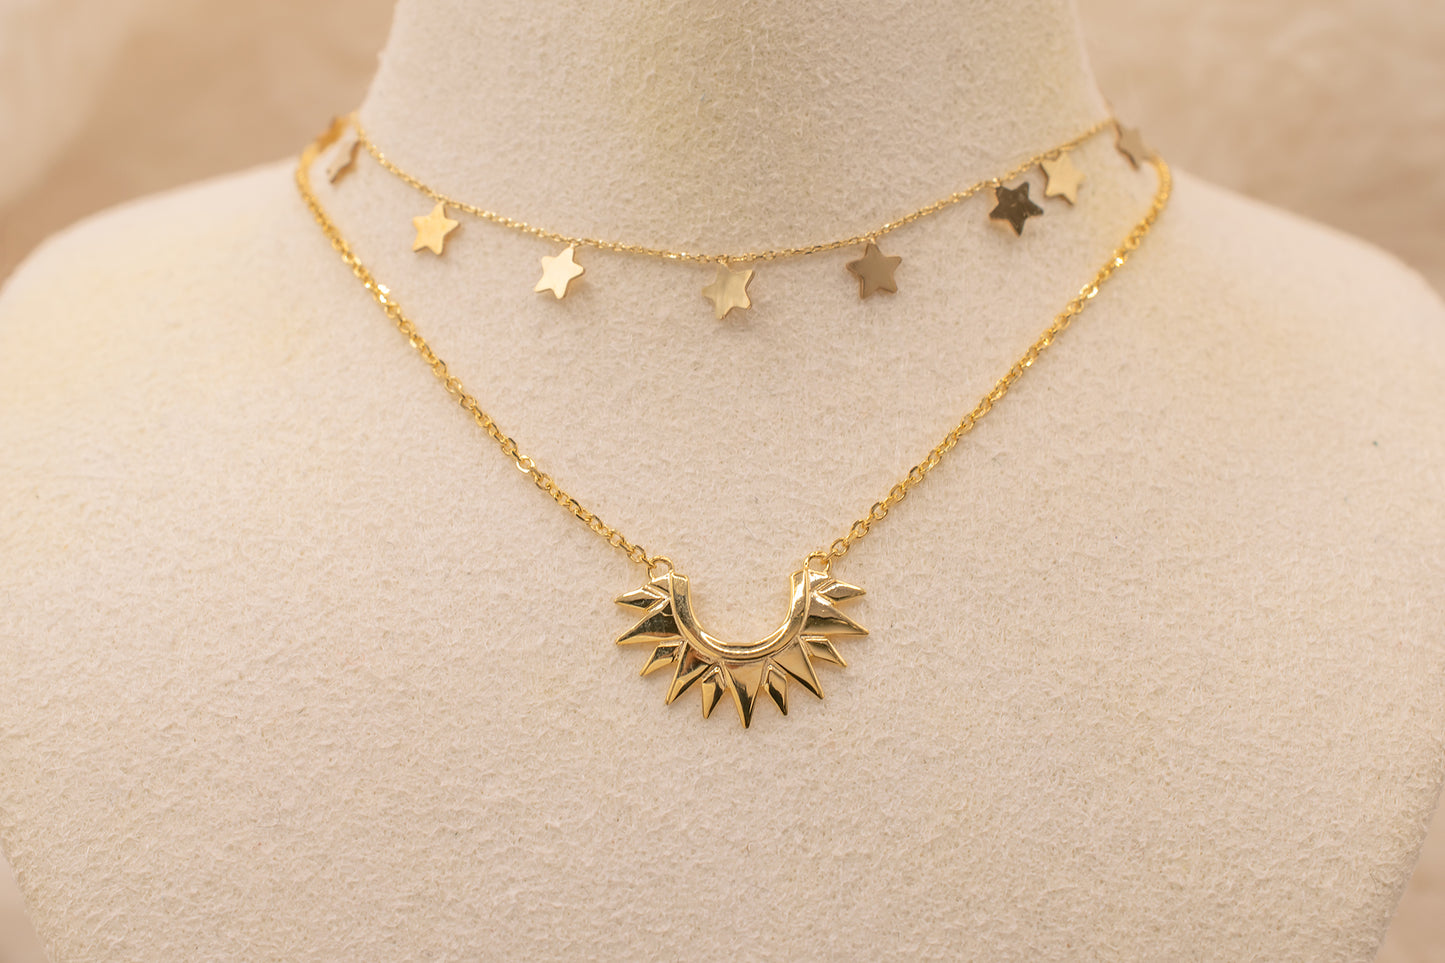 Dainty 14K Yellow Gold Adjustable Length Dangling Star Layering Necklace